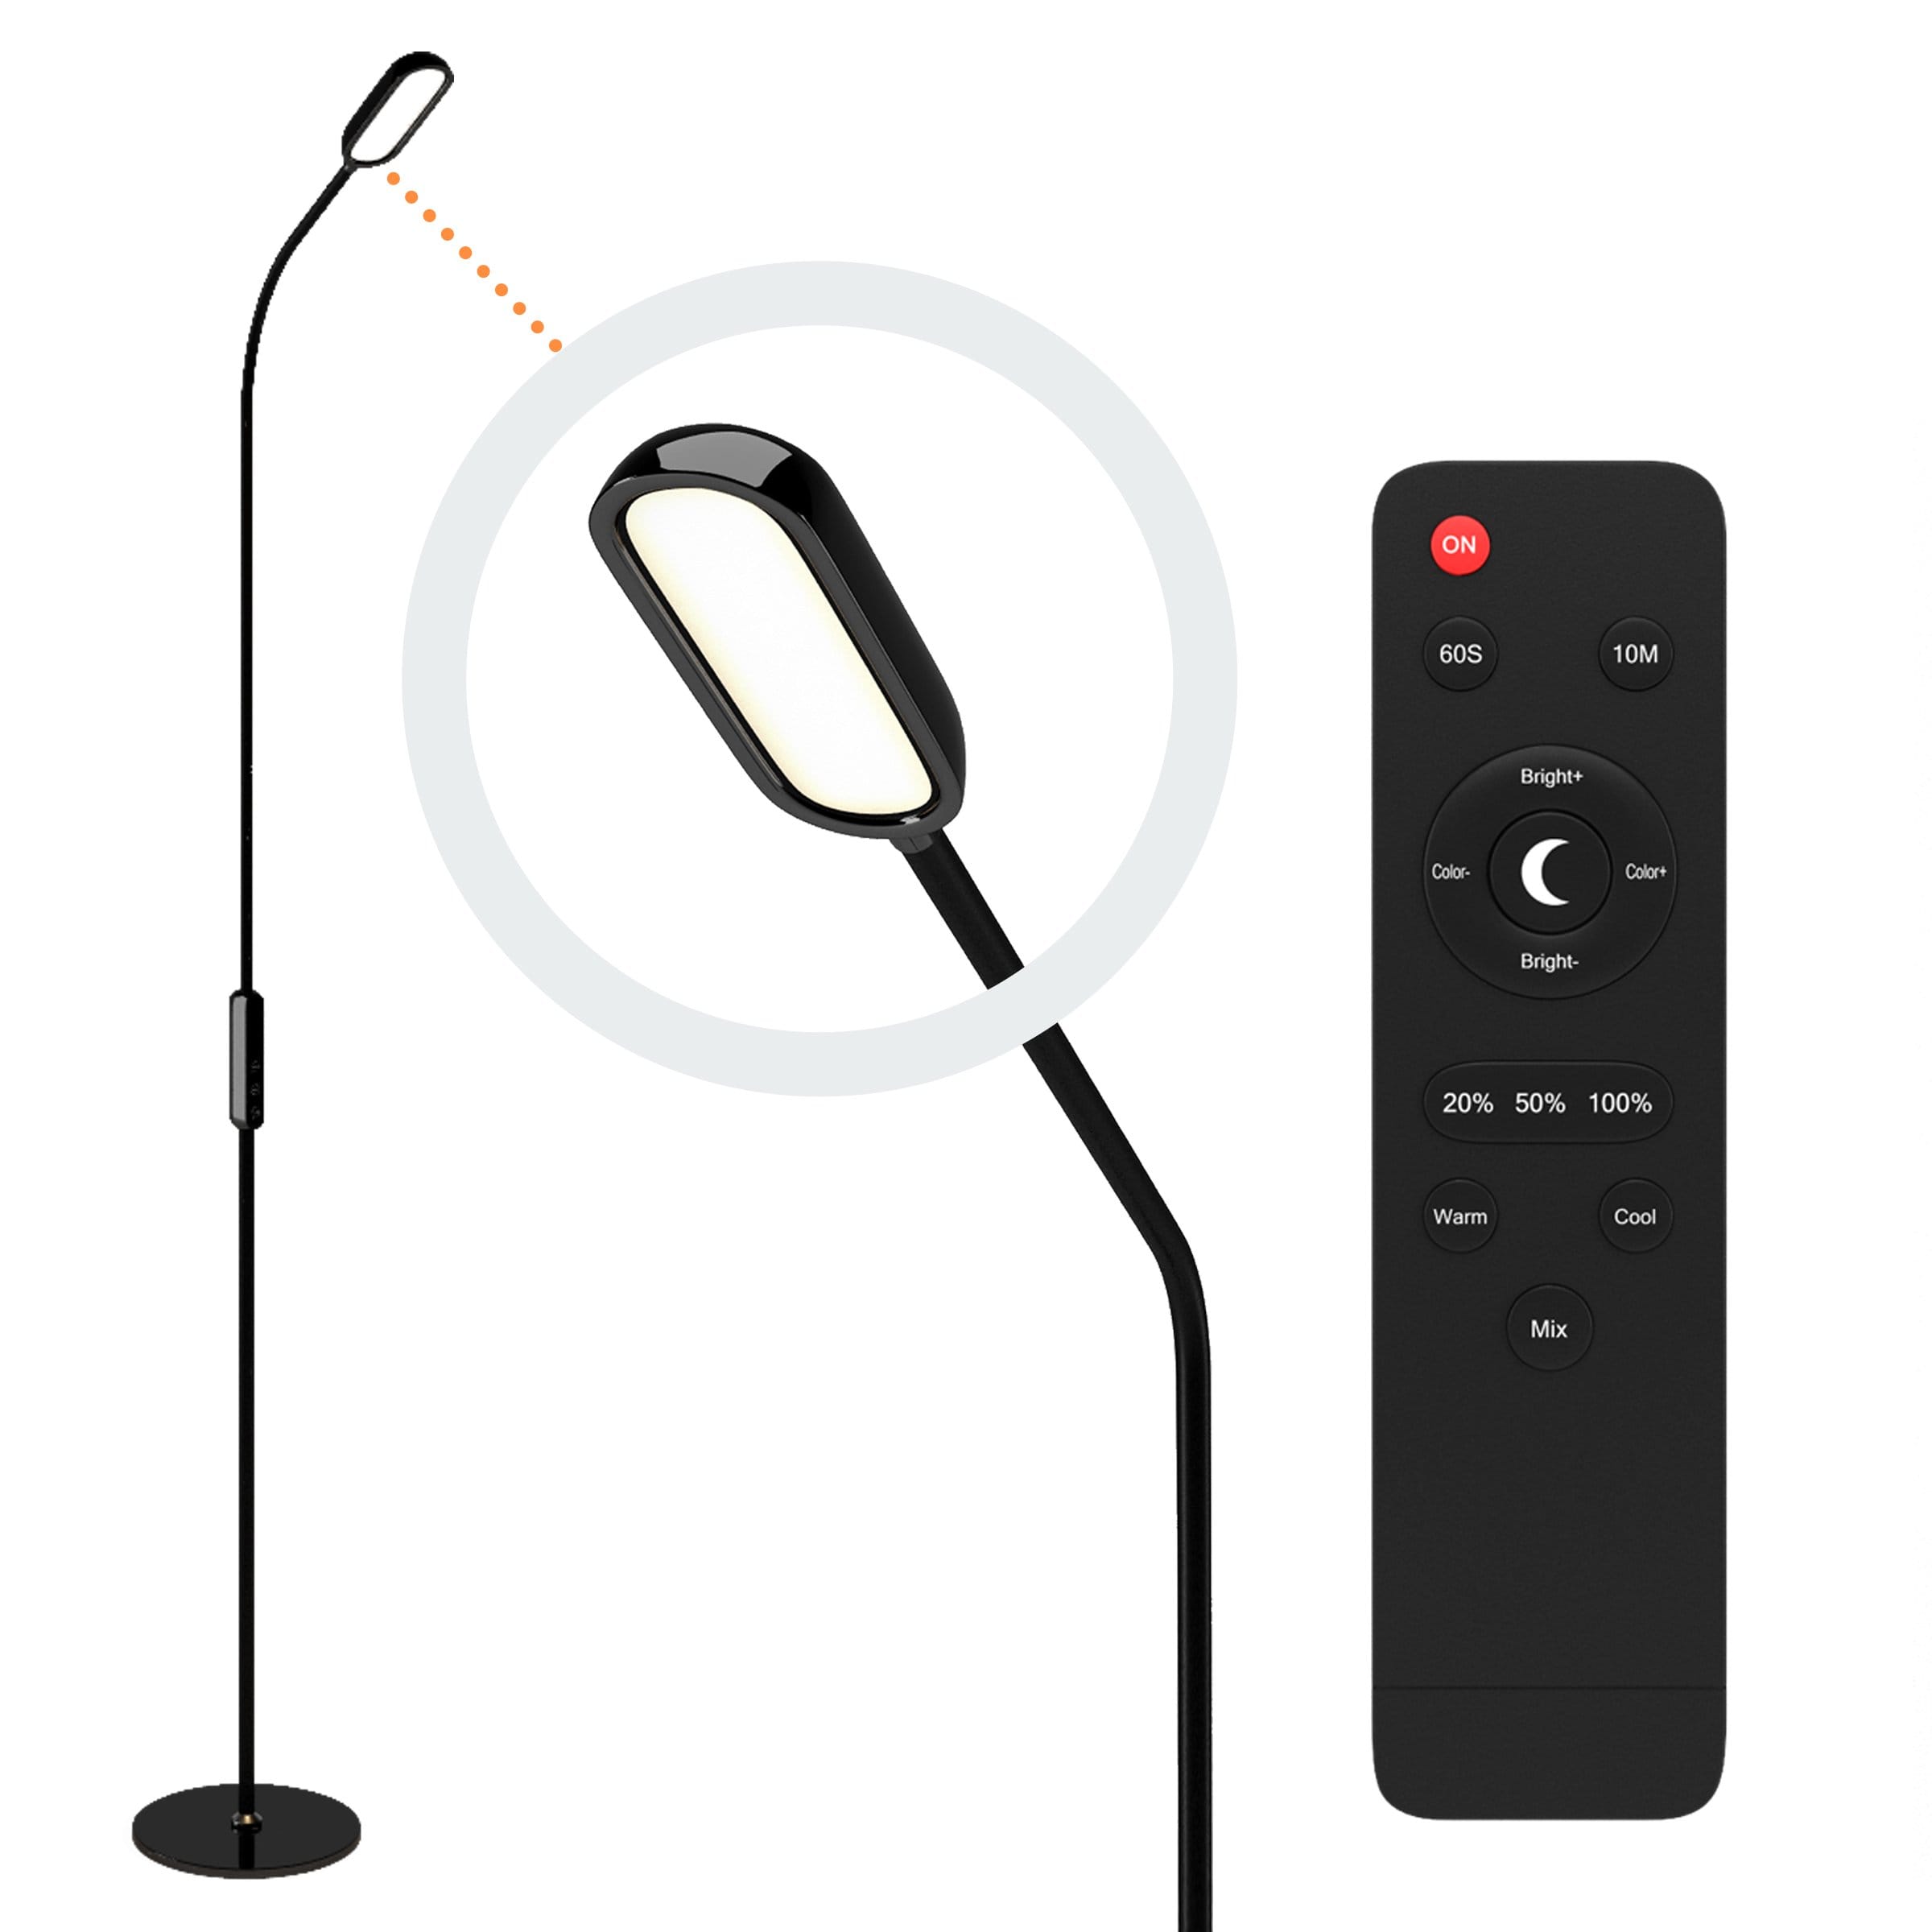 https://lustrat.com/cdn/shop/products/lustrat-floor-lamp-gooseneck-led-floor-lamp-with-remote-control-for-bedrooms-and-living-rooms-dimmable-led-floor-lamp-w-flexible-gooseneck-remote-touch-control-30550336241863.jpg?v=1627984258